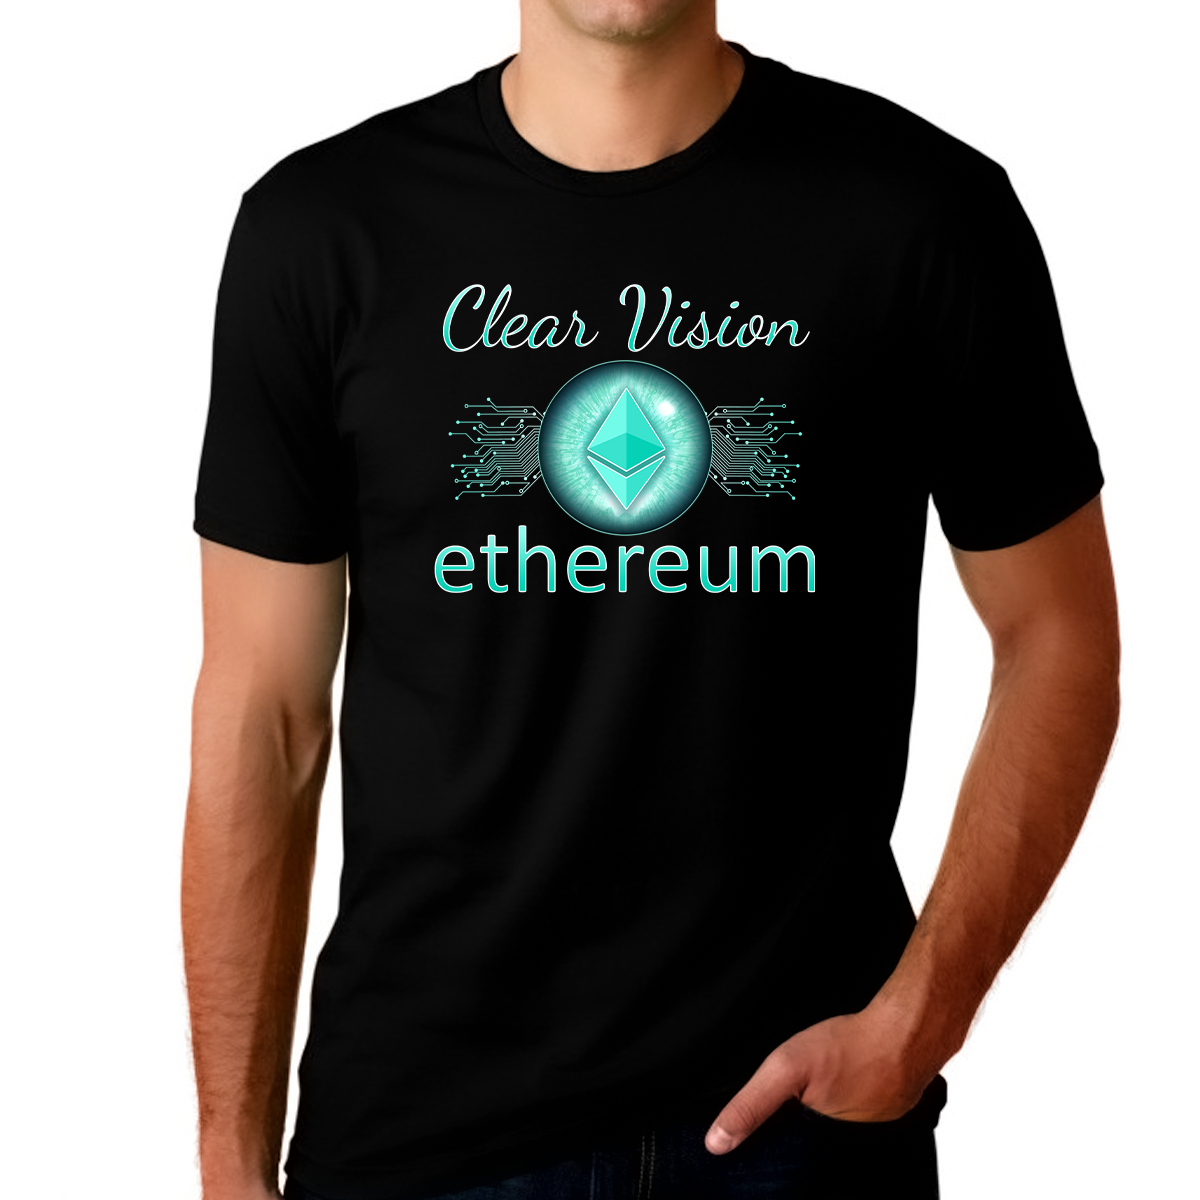 Crypto Shirt for Men Crypto Gifts Ethereum Shirt Crypto Shirts for Men Crypto Shirt ETH Ethereum Shirt